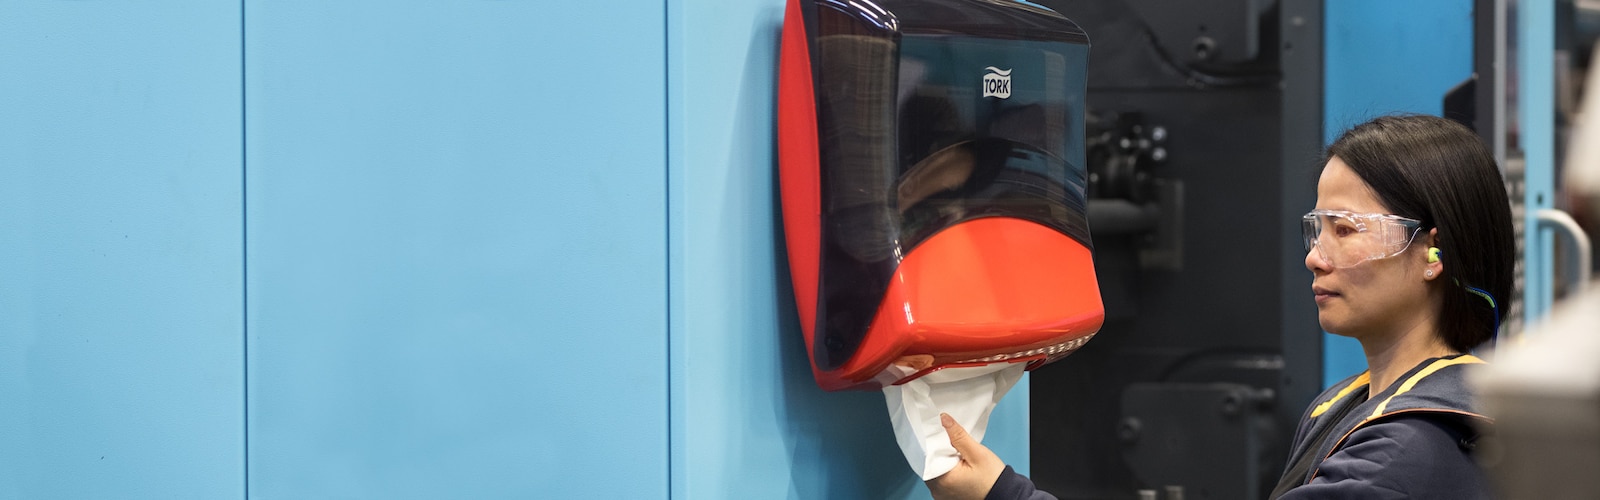 A female industry worker wearing safety glasses is pulling a paper towel out of a Tork Performance dispenser.